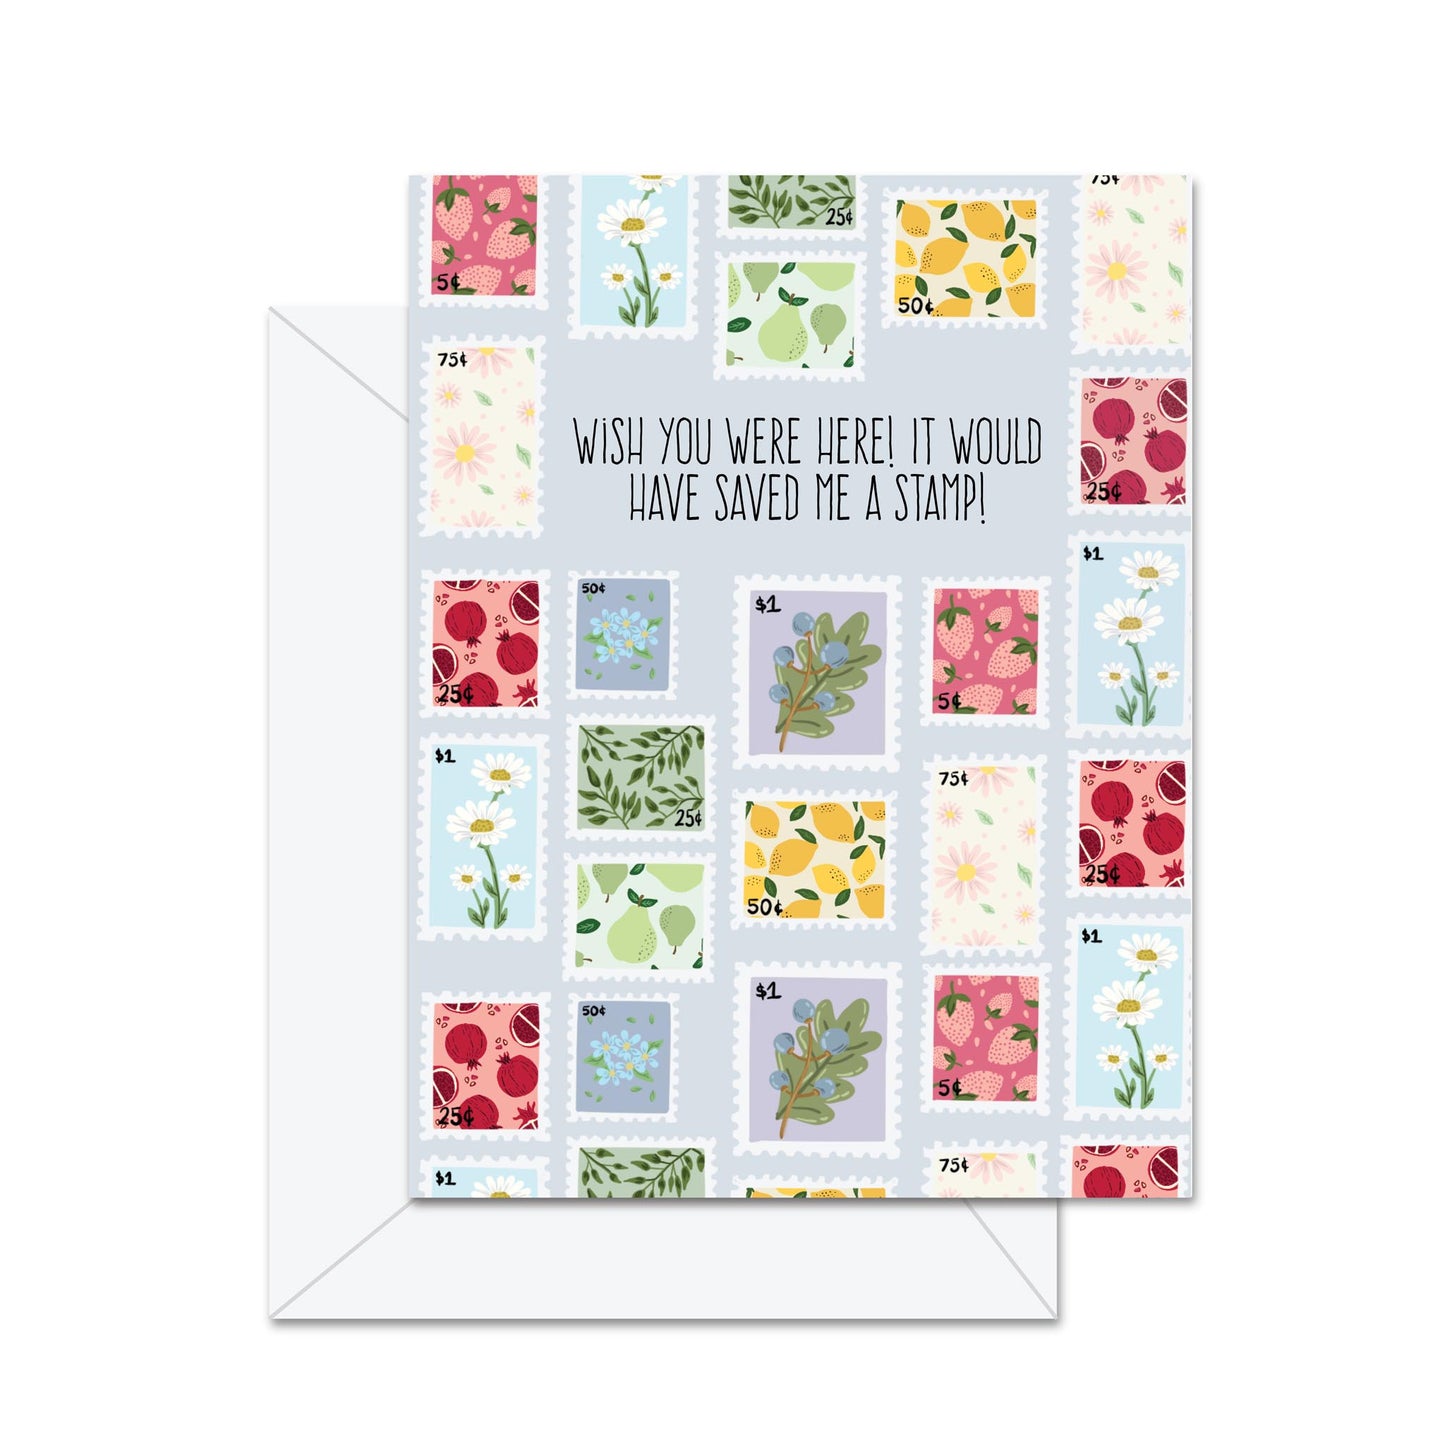 Wish You Were Here! It Would Have Saved Me A Stamp! - Greeting Card